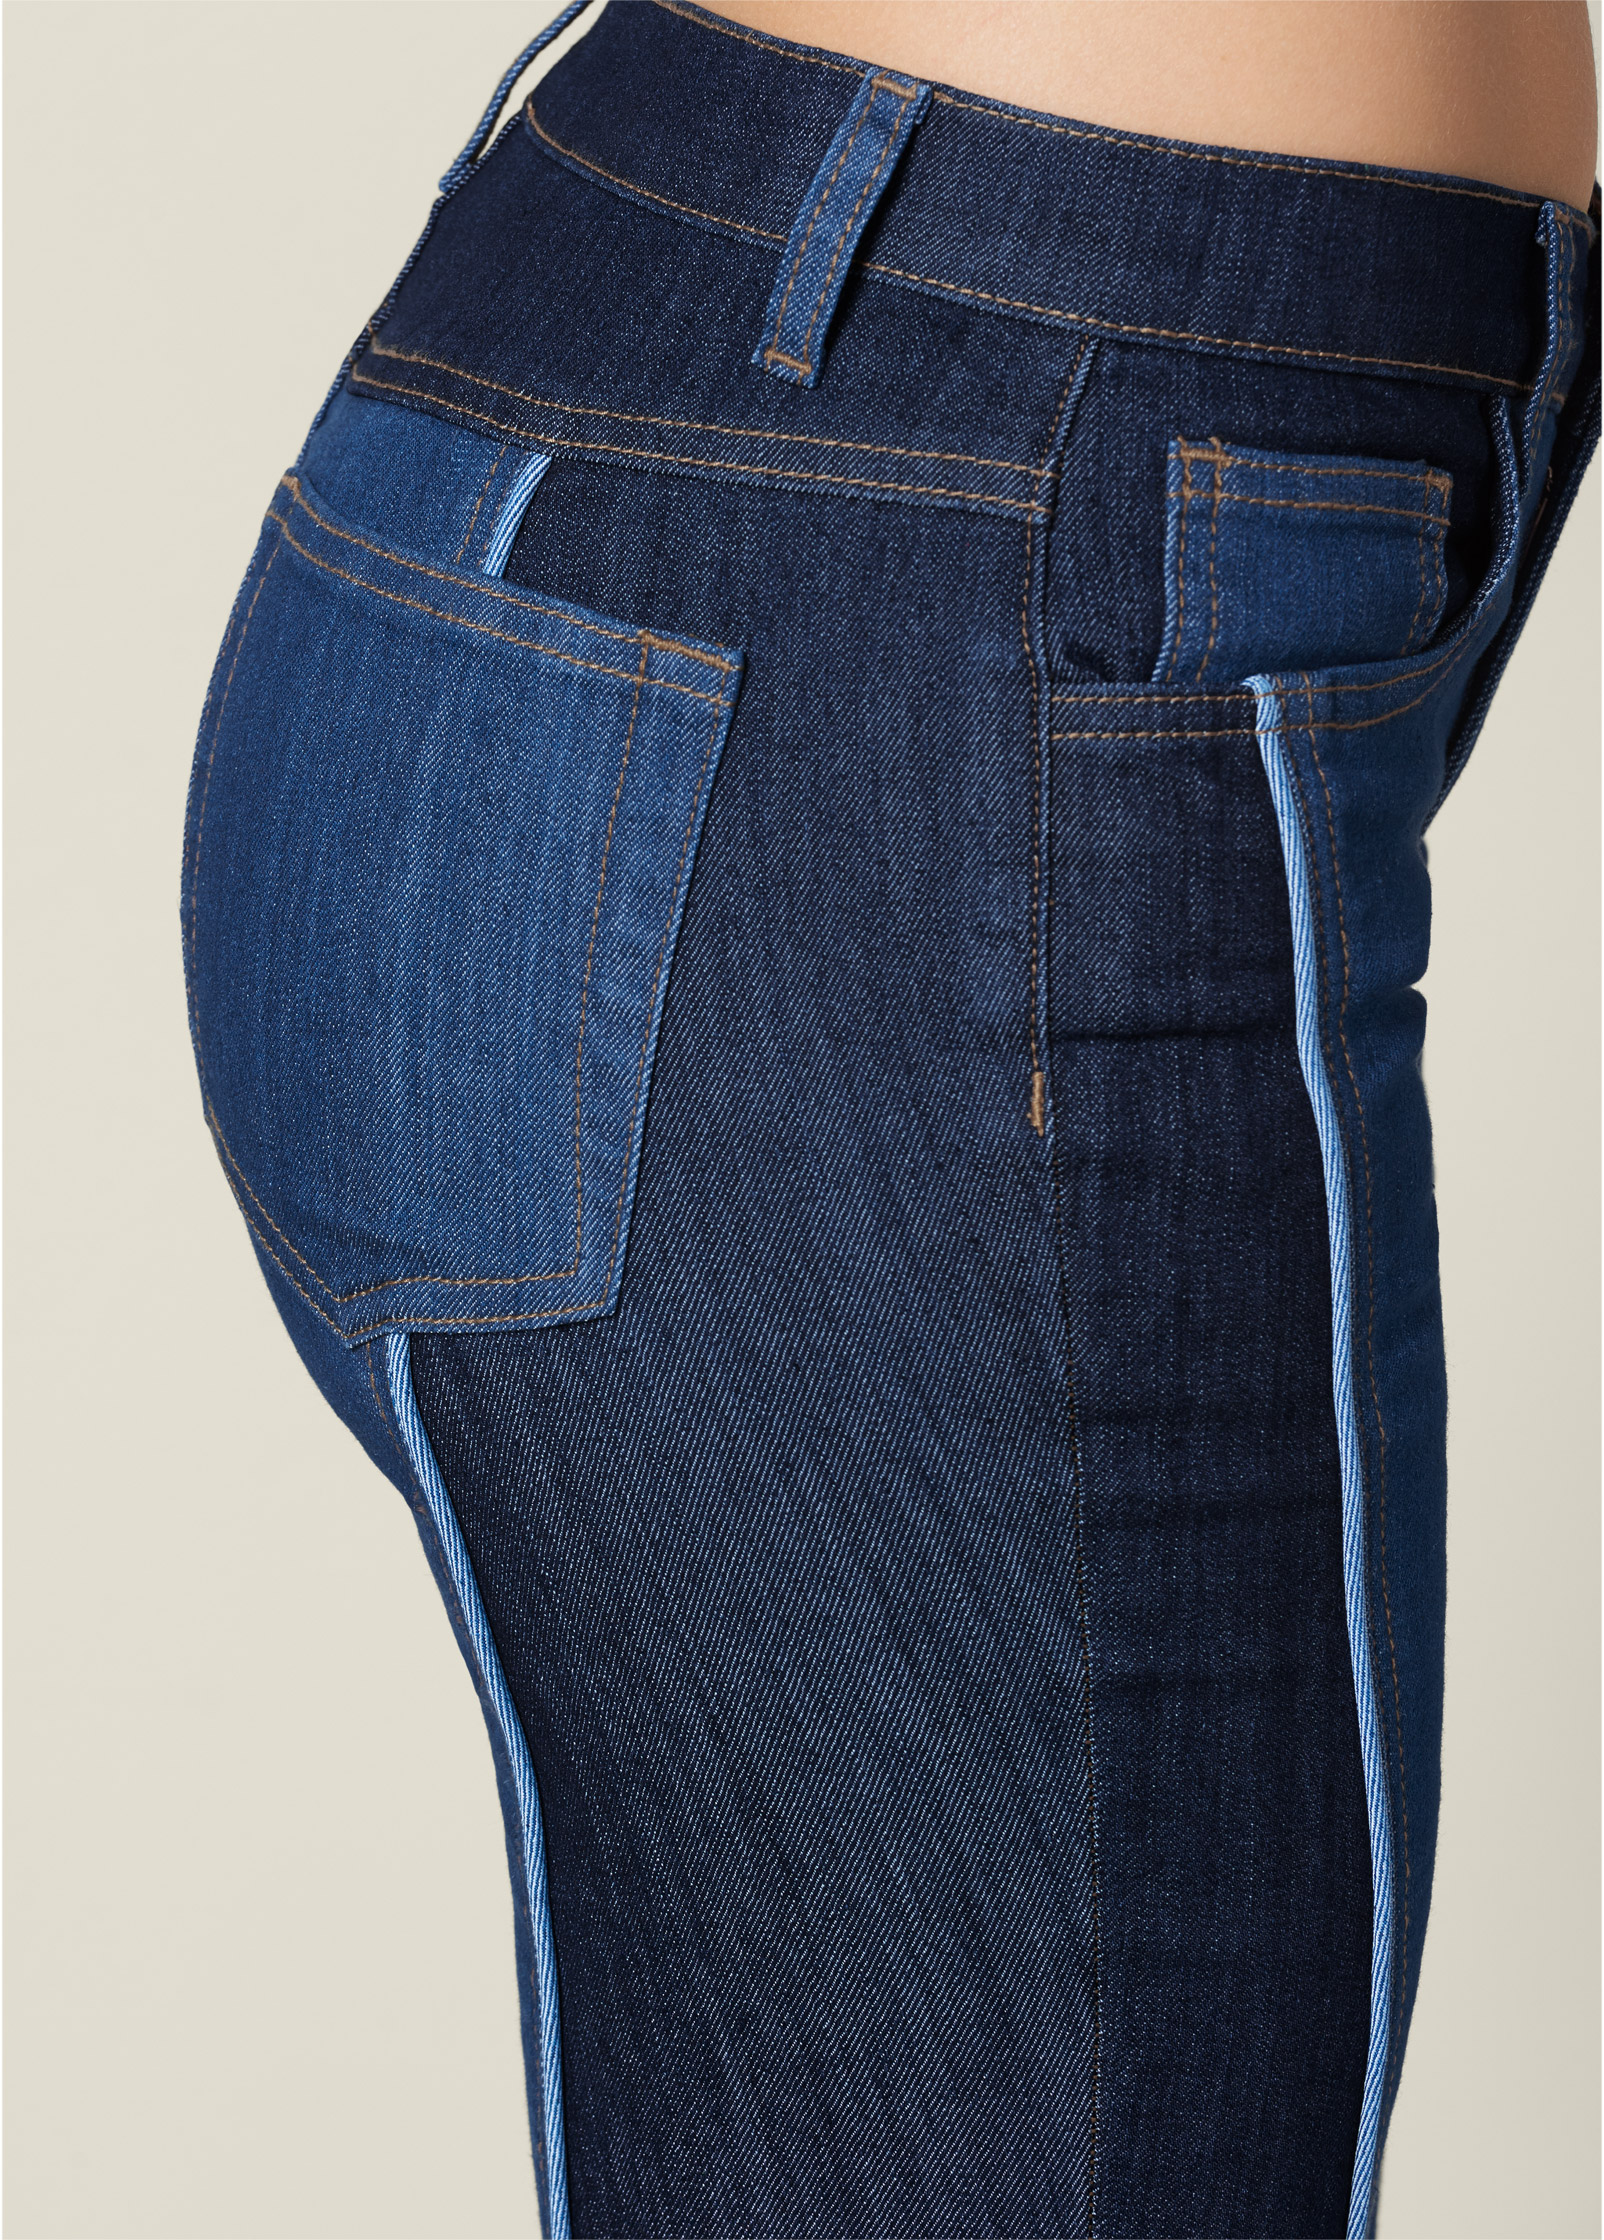 two tone jeans plus size